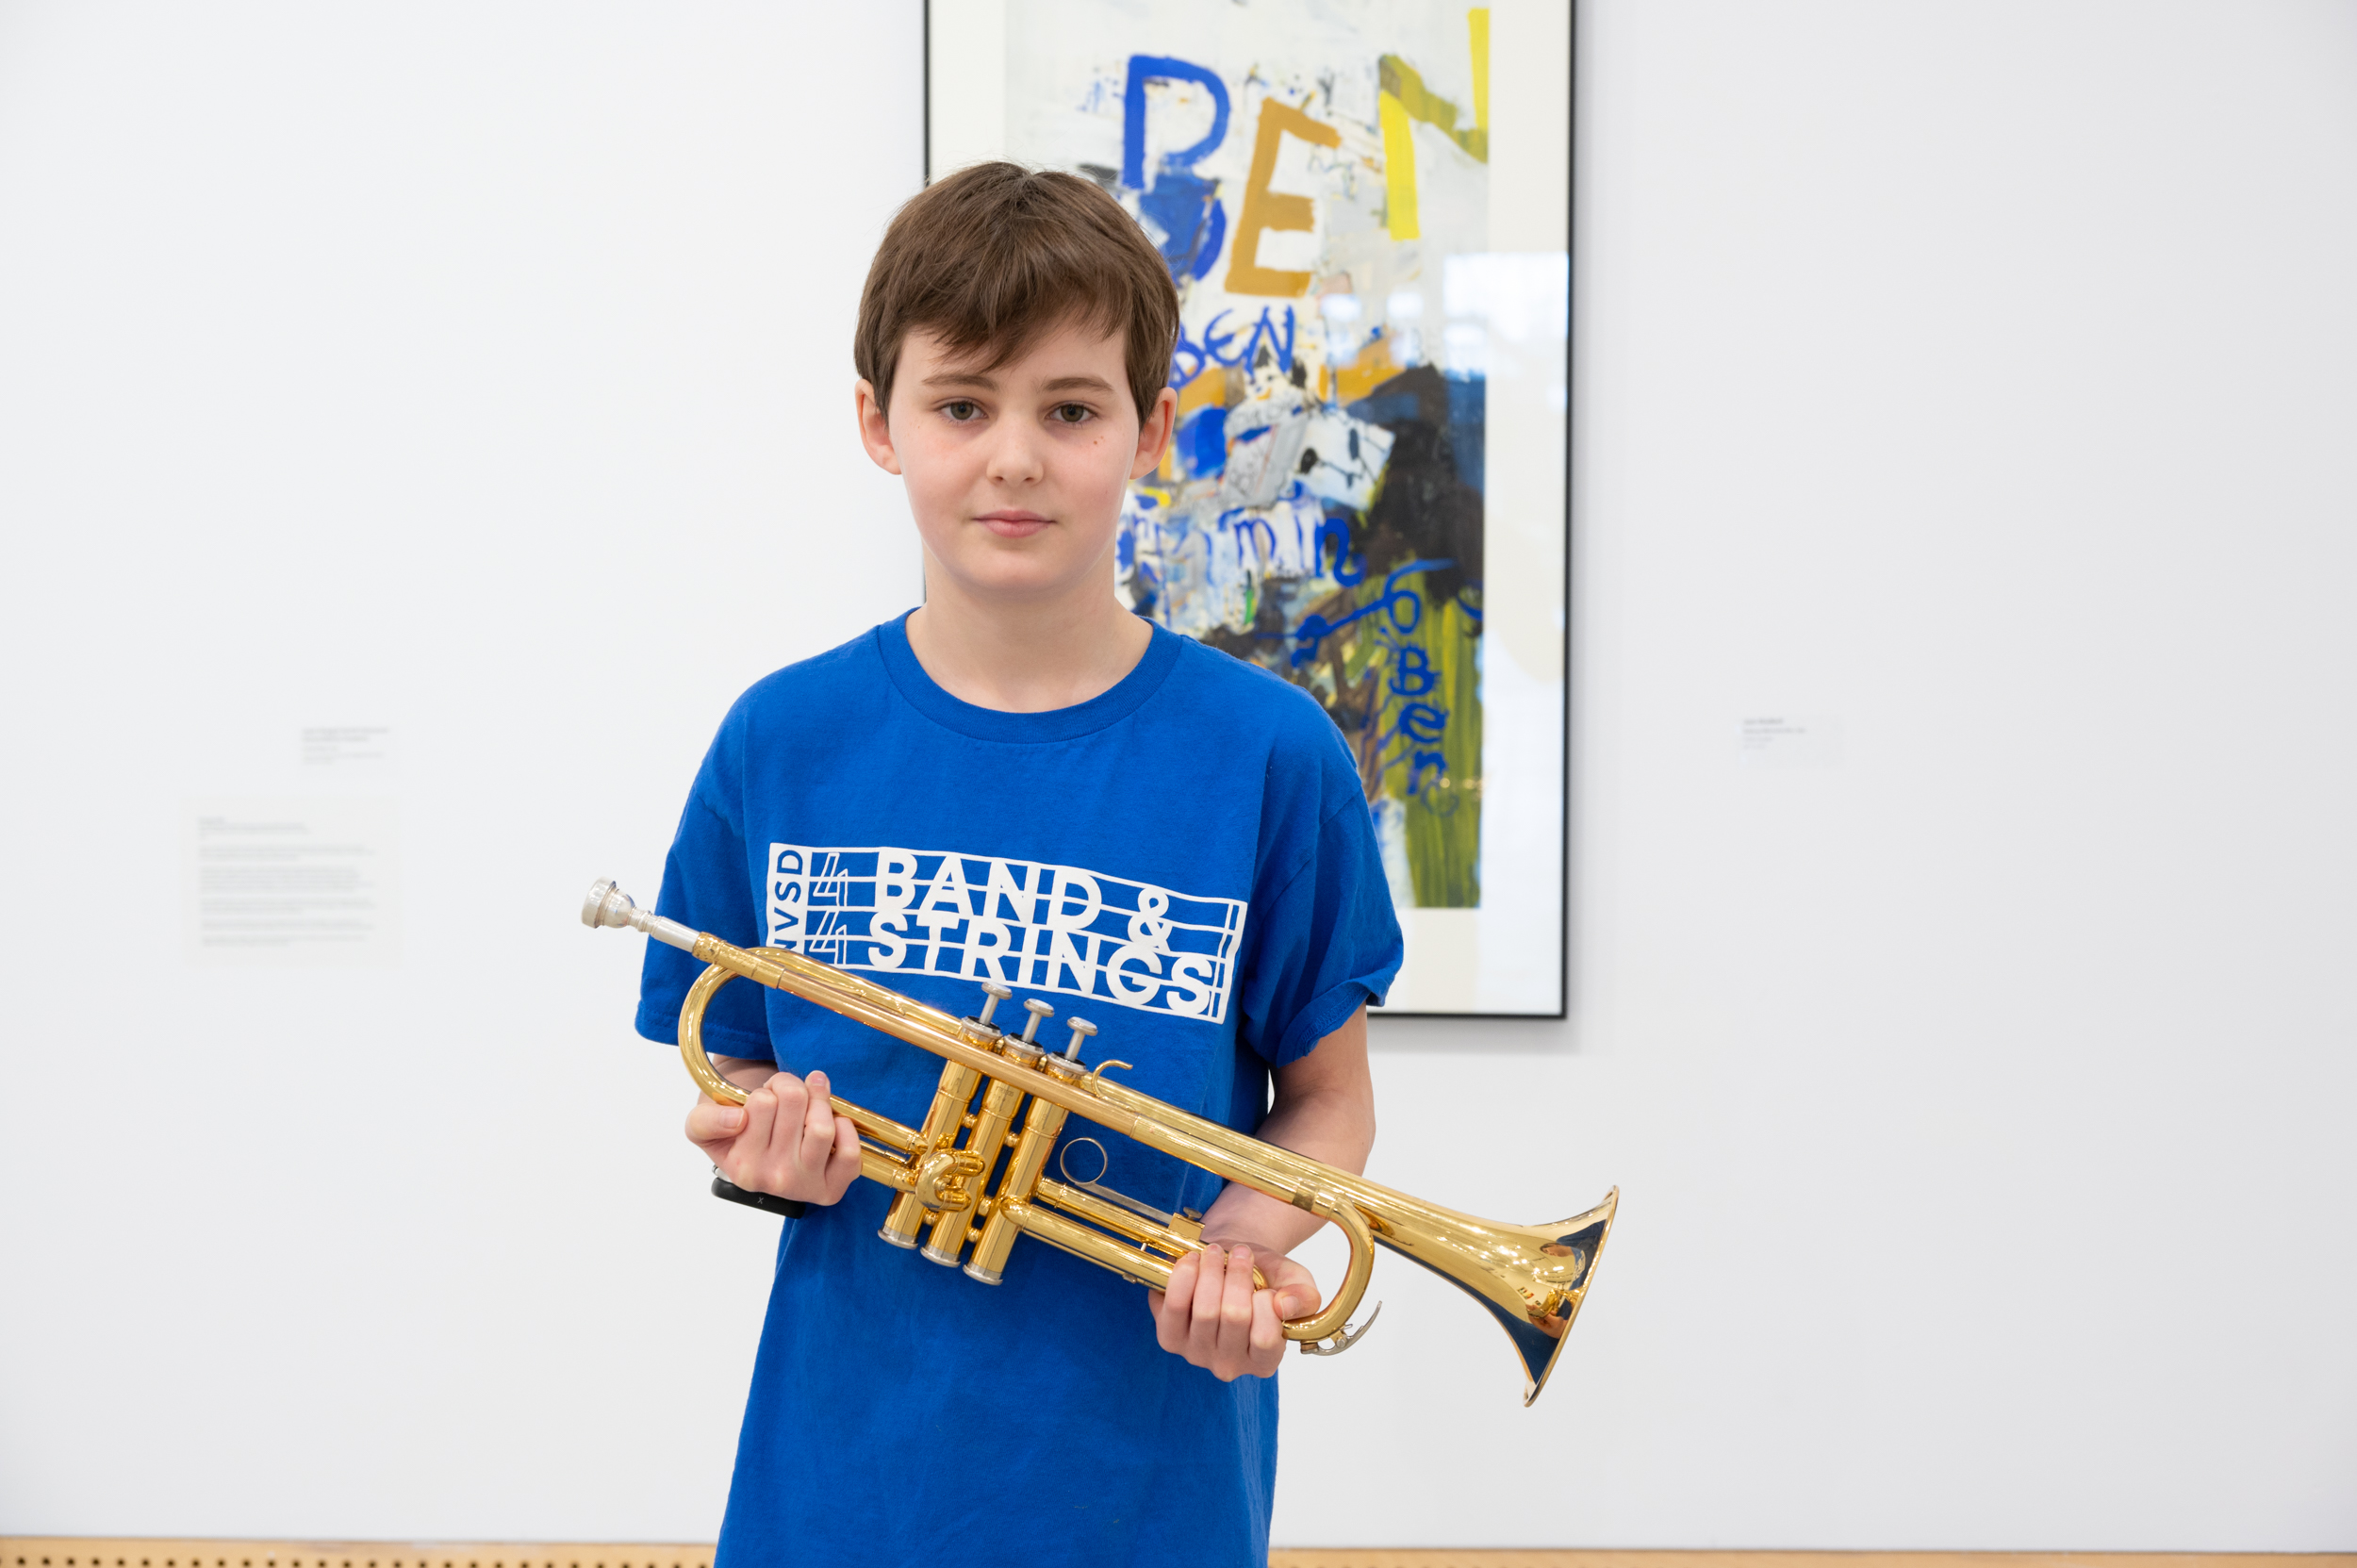 Time to celebrate Young Artist of the Week Ben!